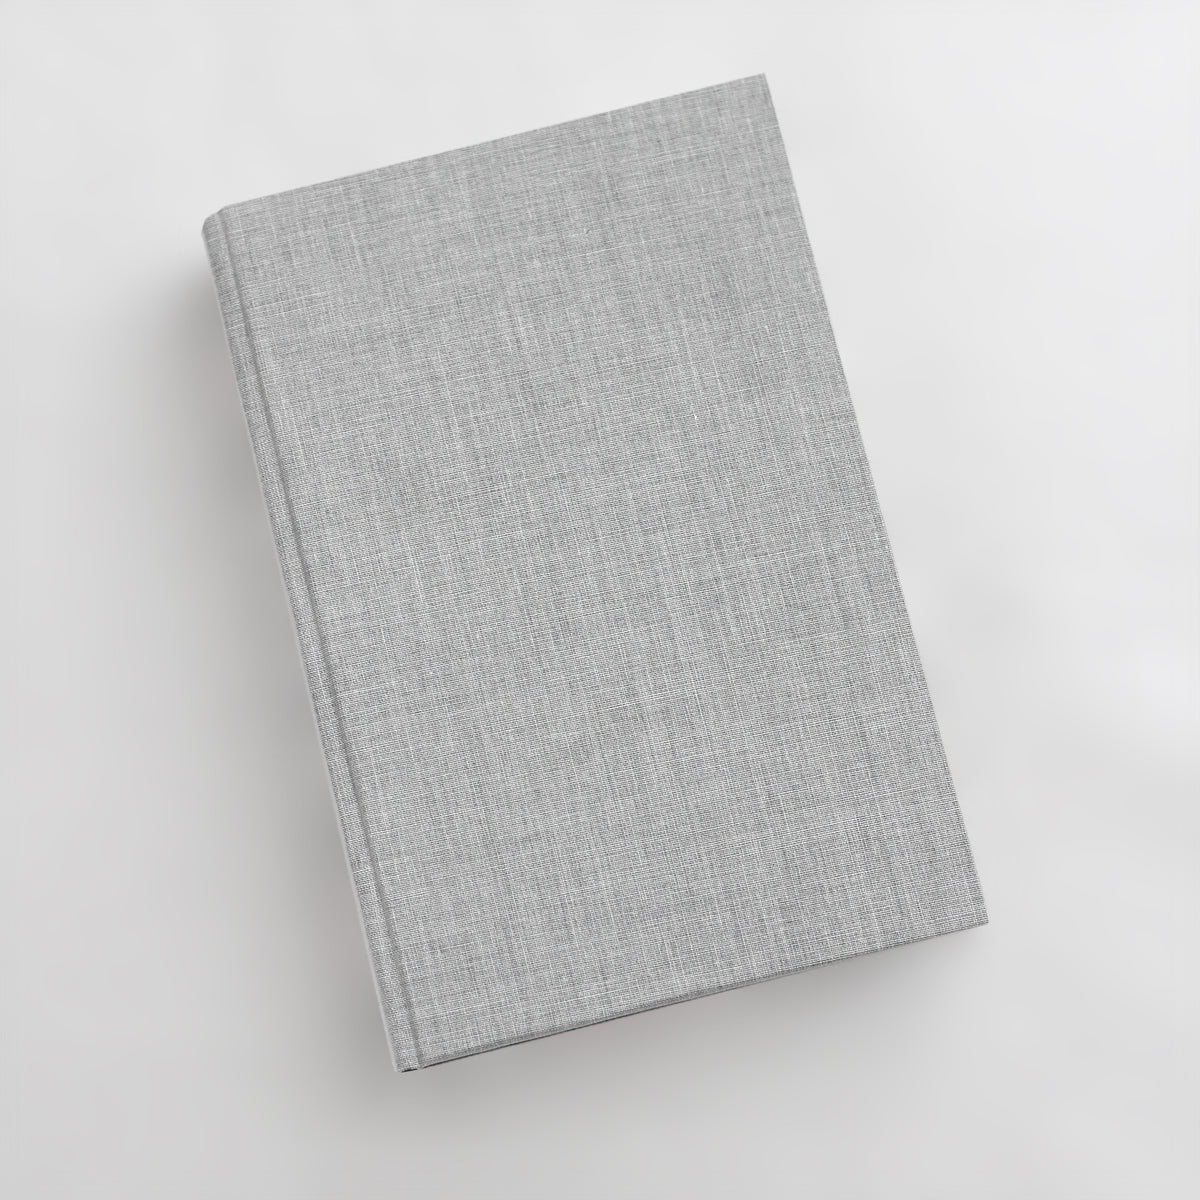 Medium Blank Page Journal with Dove Gray Cotton Cover